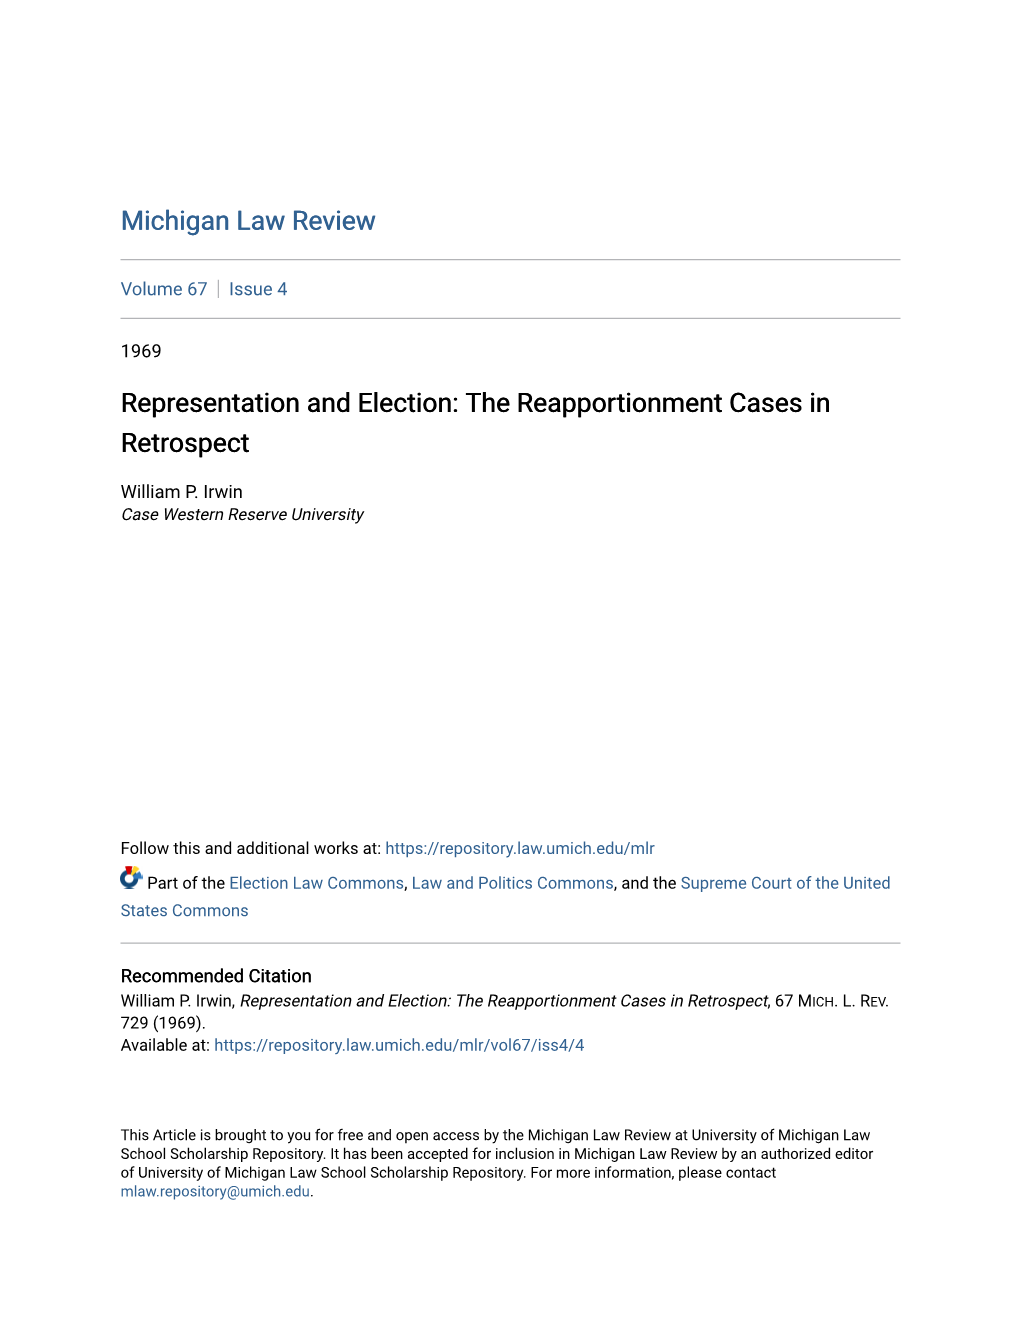 Representation and Election: the Reapportionment Cases in Retrospect